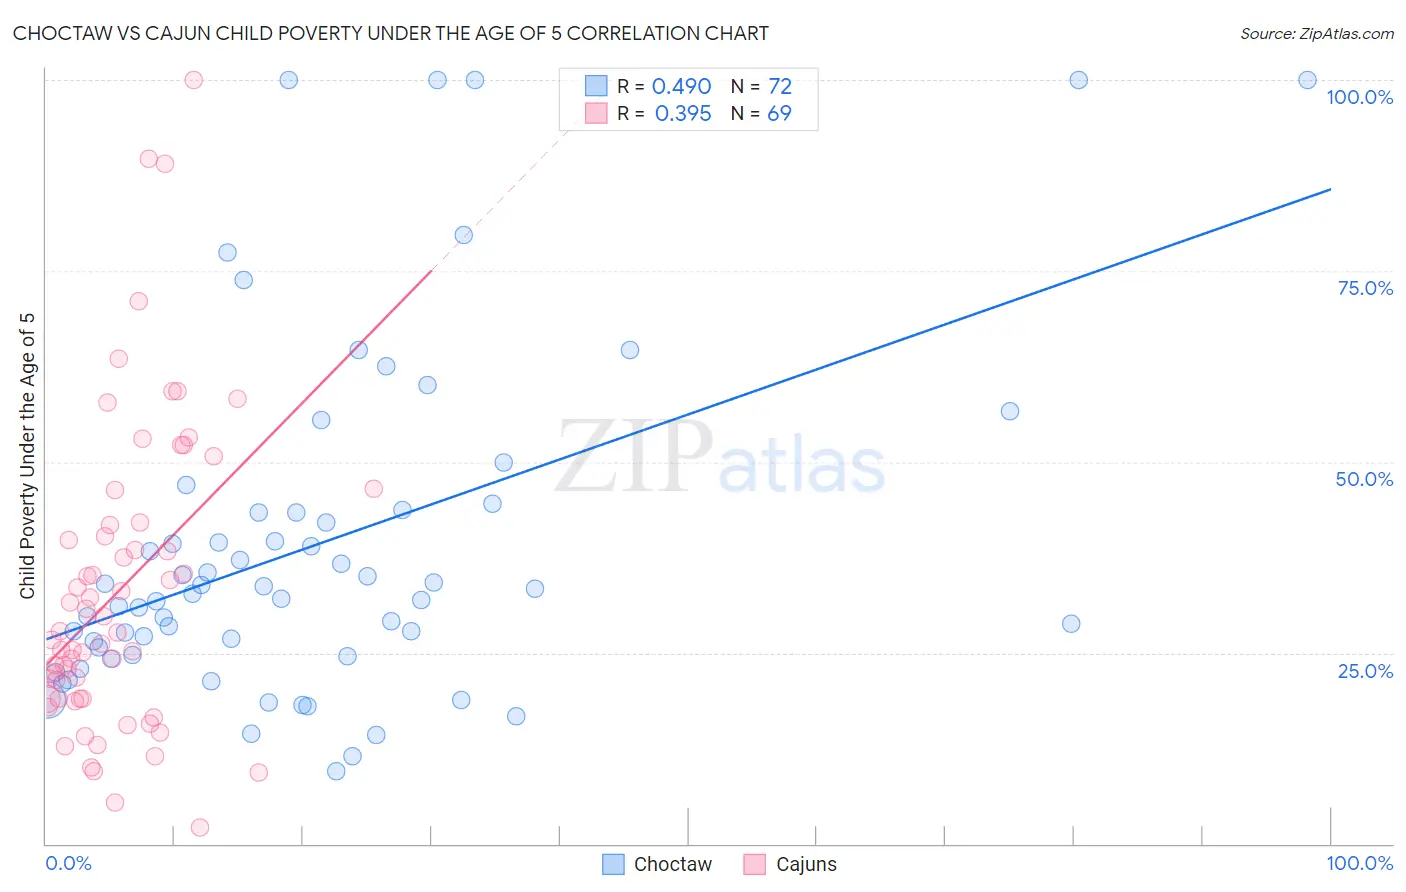 Choctaw vs Cajun Child Poverty Under the Age of 5